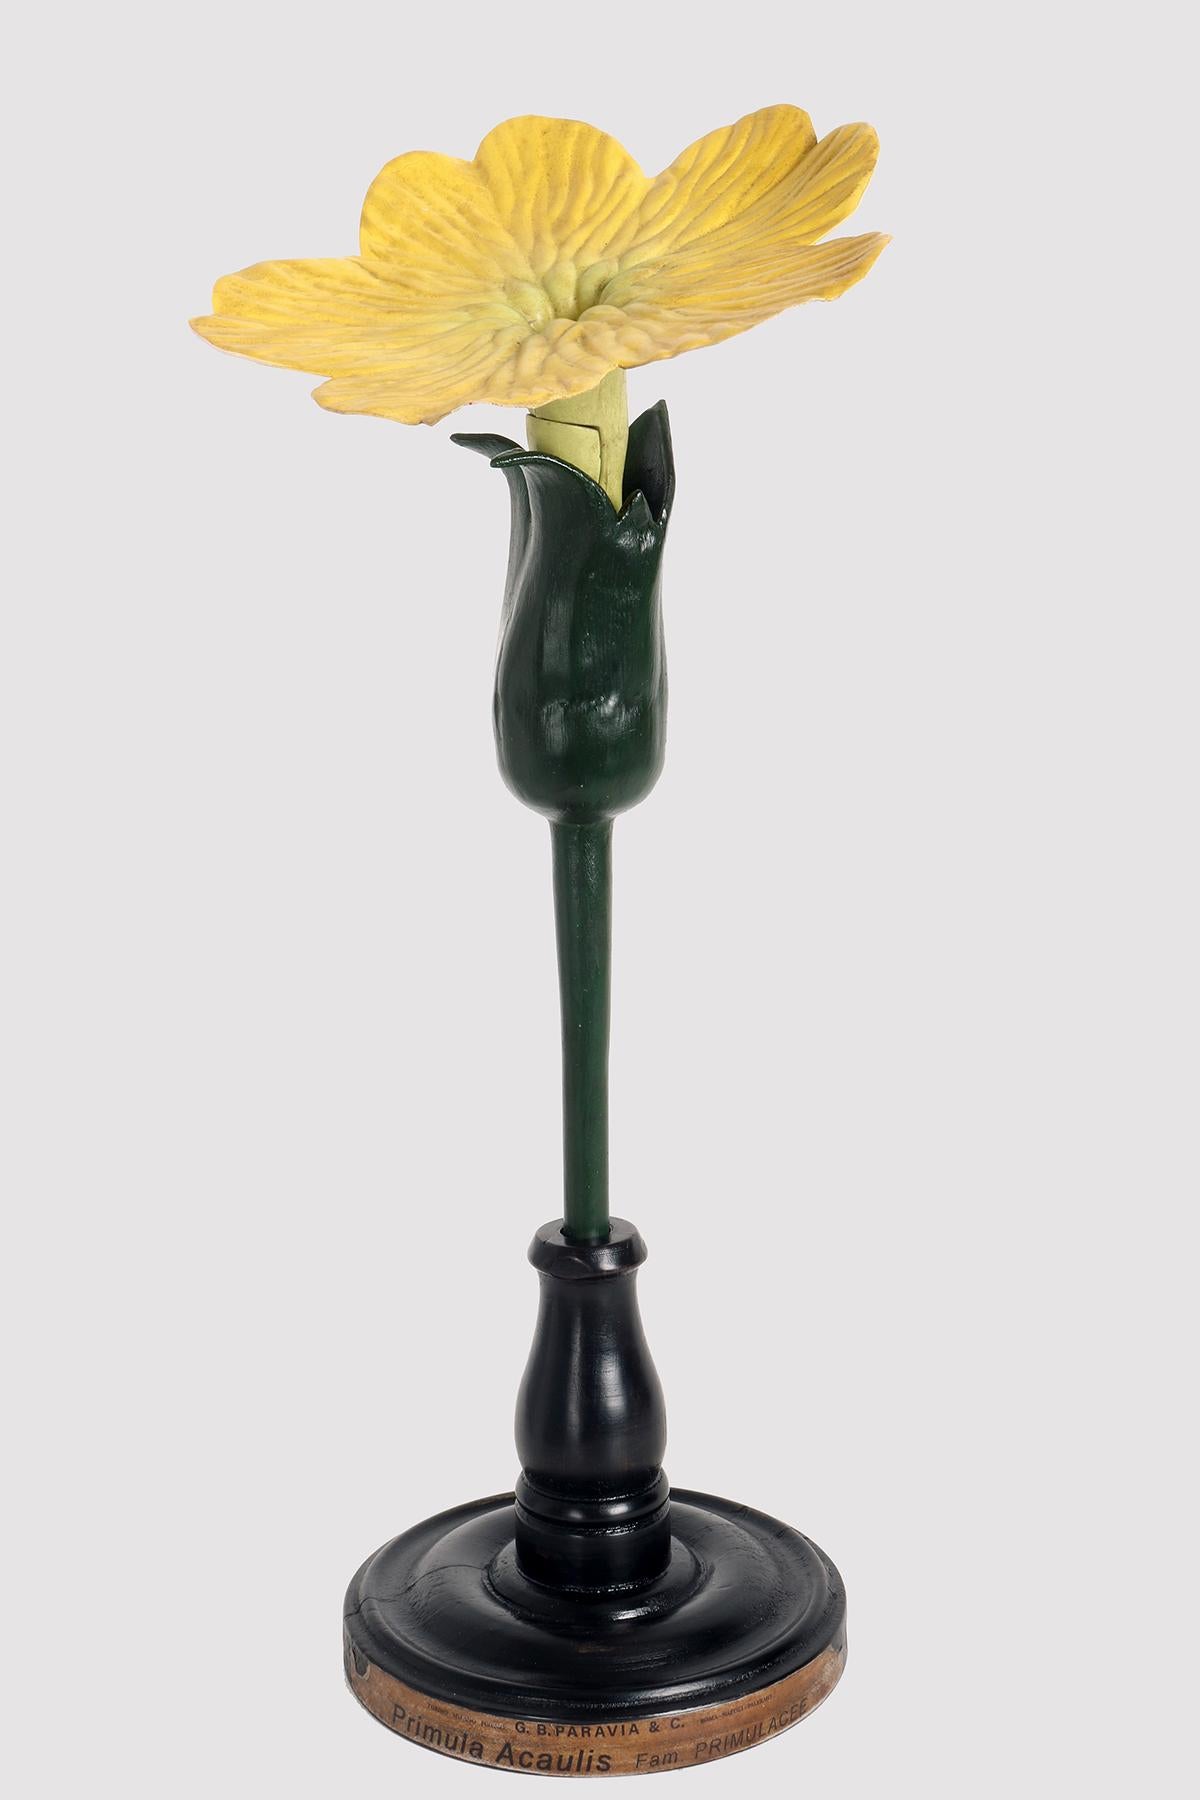 A botanical maquette for didactic use, depicting a flower of Primrose, Acaulis, Primulaceae. Made of metal, paper, plaster, galalith and wood. Extremely detailed. Paravia, Milan, Italy, circa 1940.